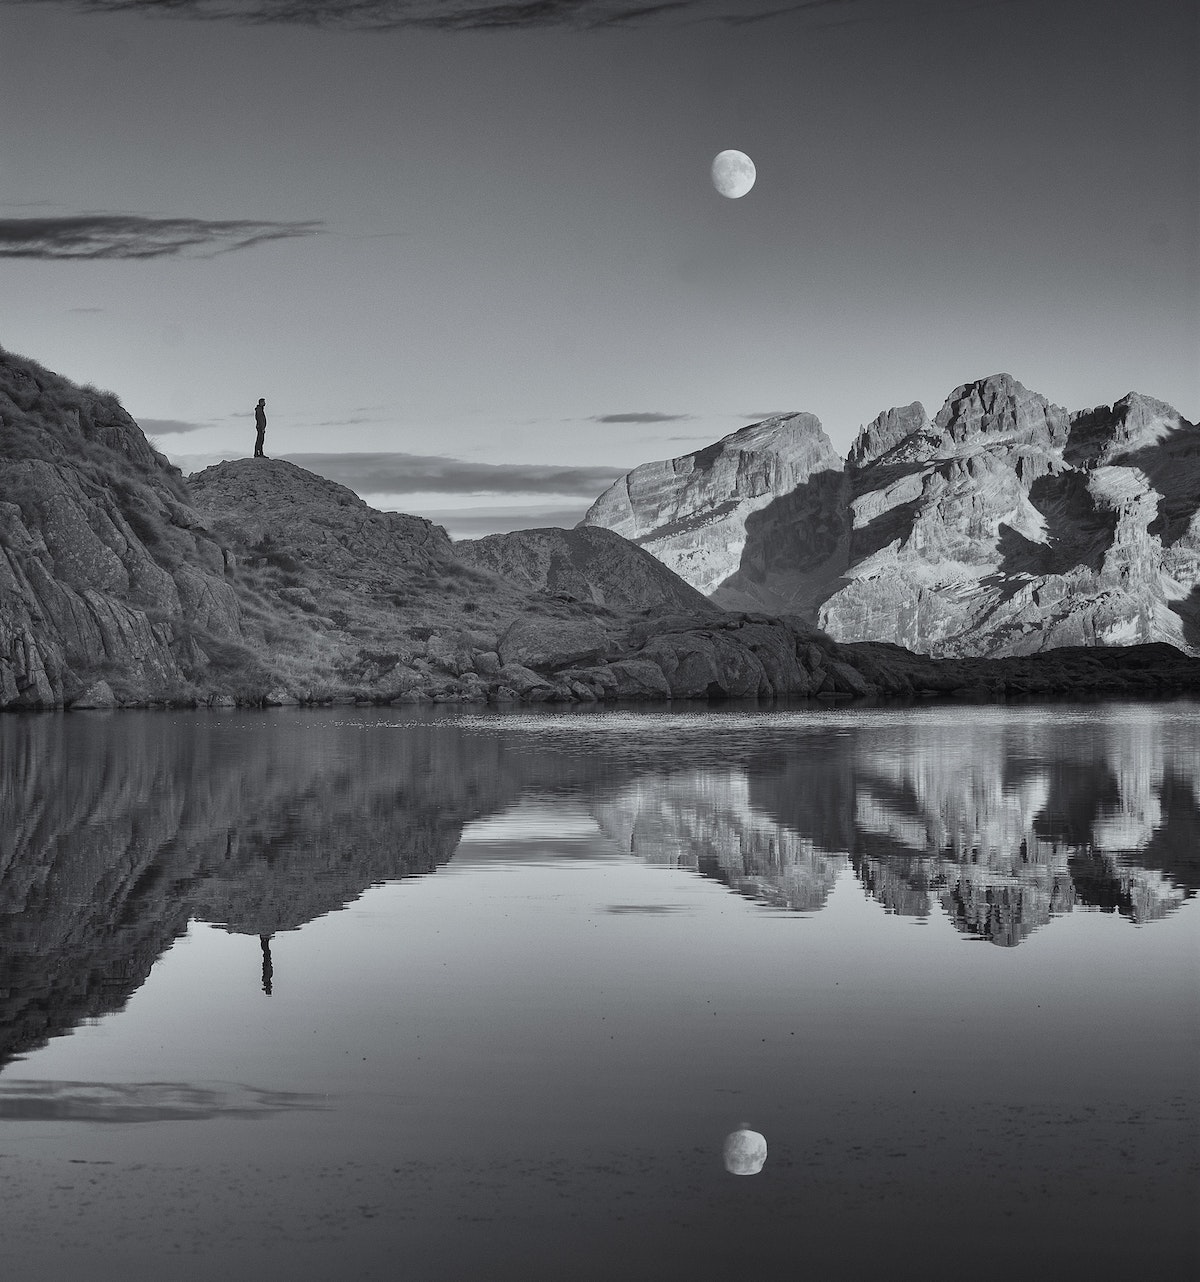 Image of a person on a rocky perch looking at a moonrise reflect on the water